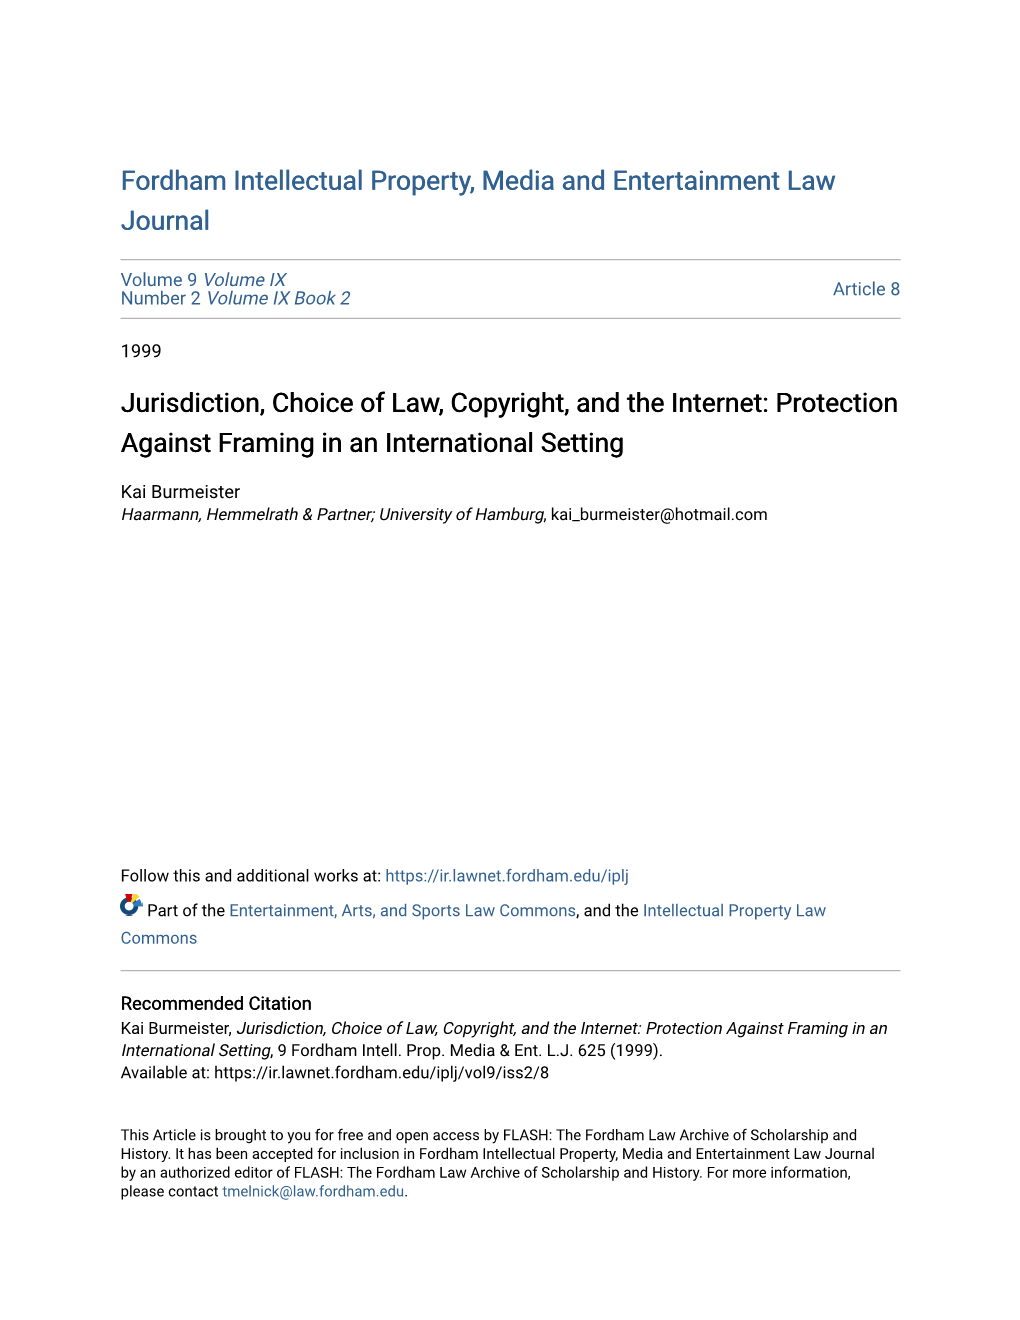 Jurisdiction, Choice of Law, Copyright, and the Internet: Protection Against Framing in an International Setting